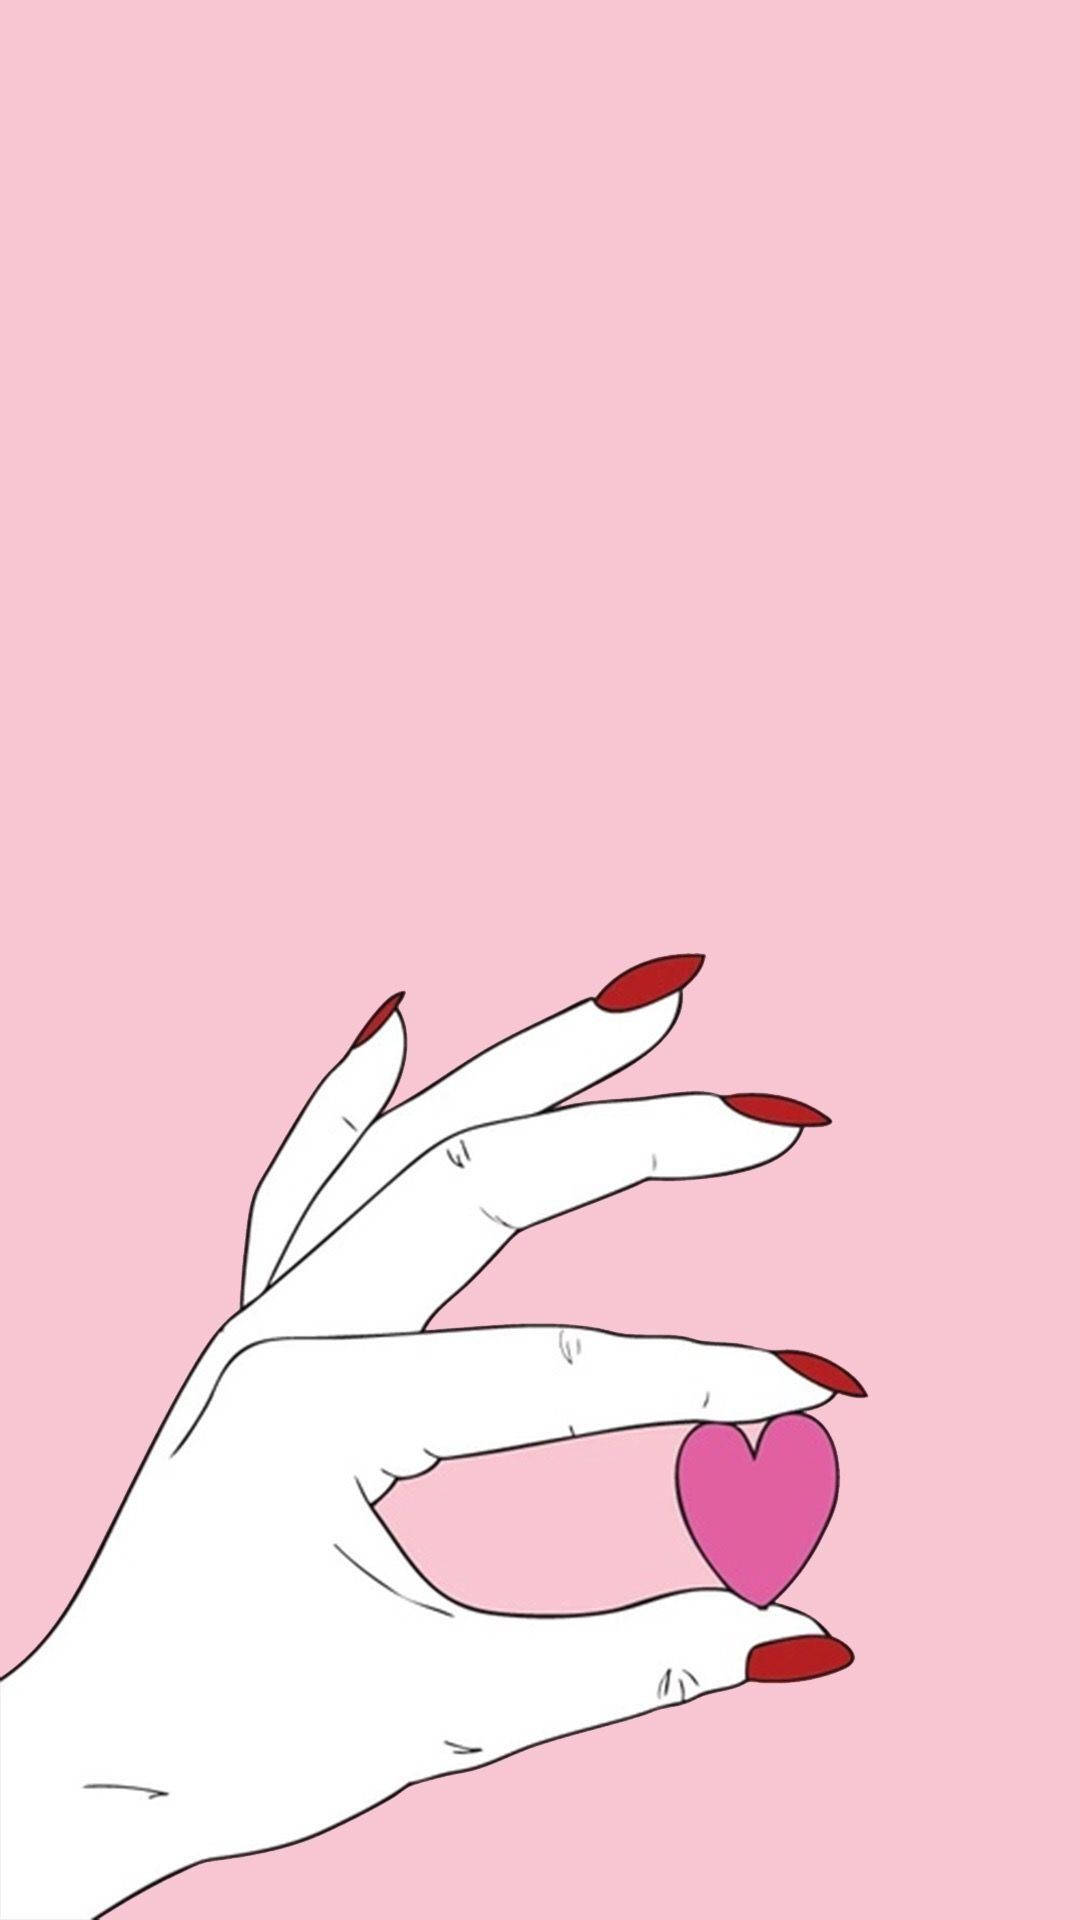 Cute Instagram Hand With Heart Background